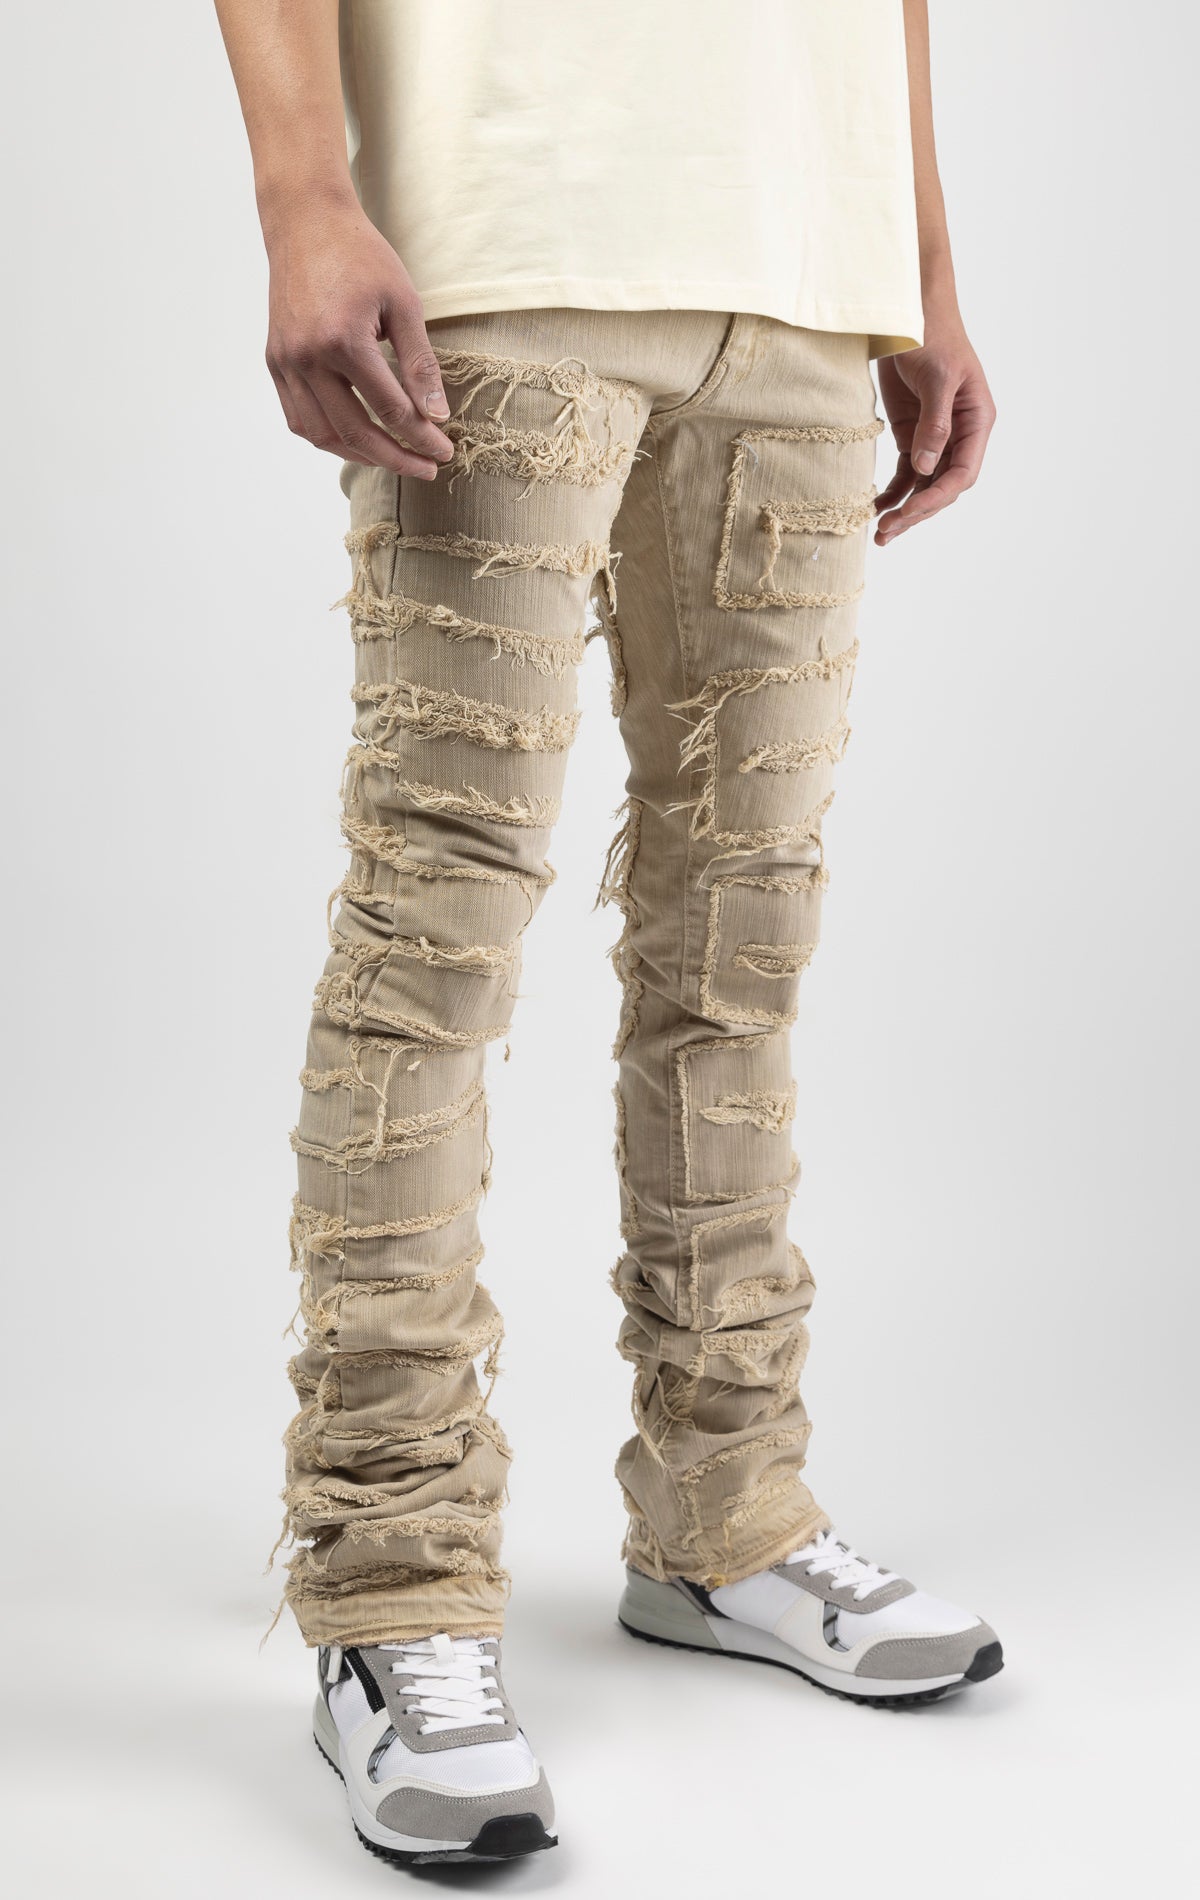 Cream bold, risk-taking flare pants feature a regular rise and extended length for maximum stacks. With a unique heavy wash and rip and repair design, complete with patches and abrasions, these skinny fit jeans are ready for adventure. Made from 98% cotton and 2% Lycra